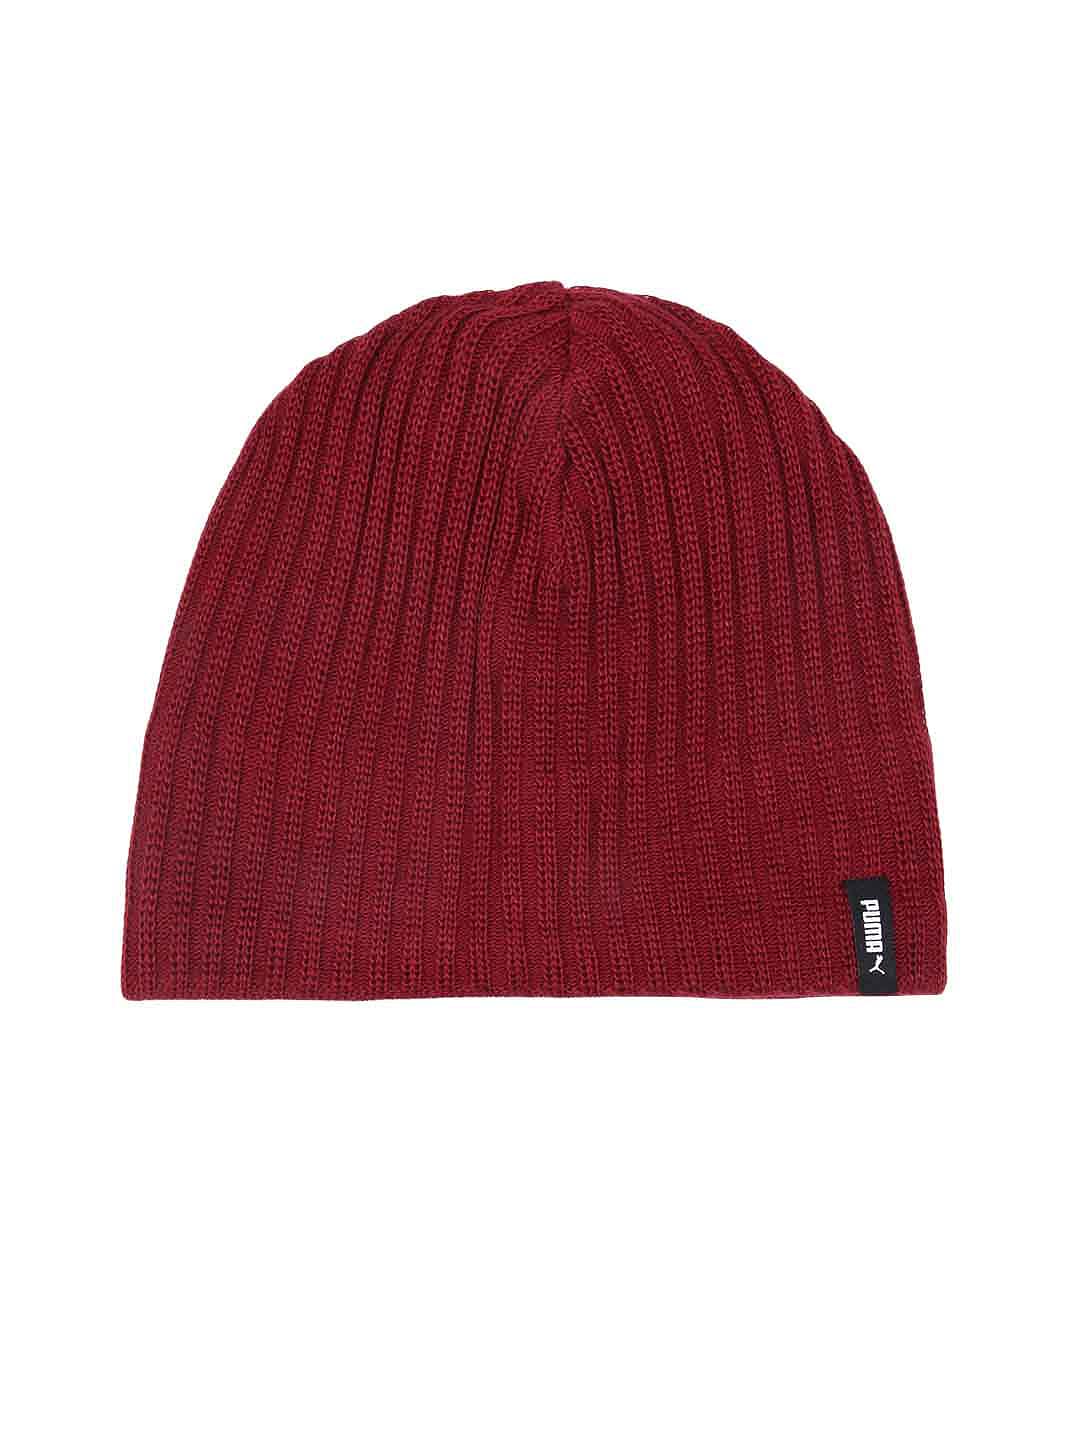 Puma Unisex Red Slouchy Cuffless Beanie Price in India